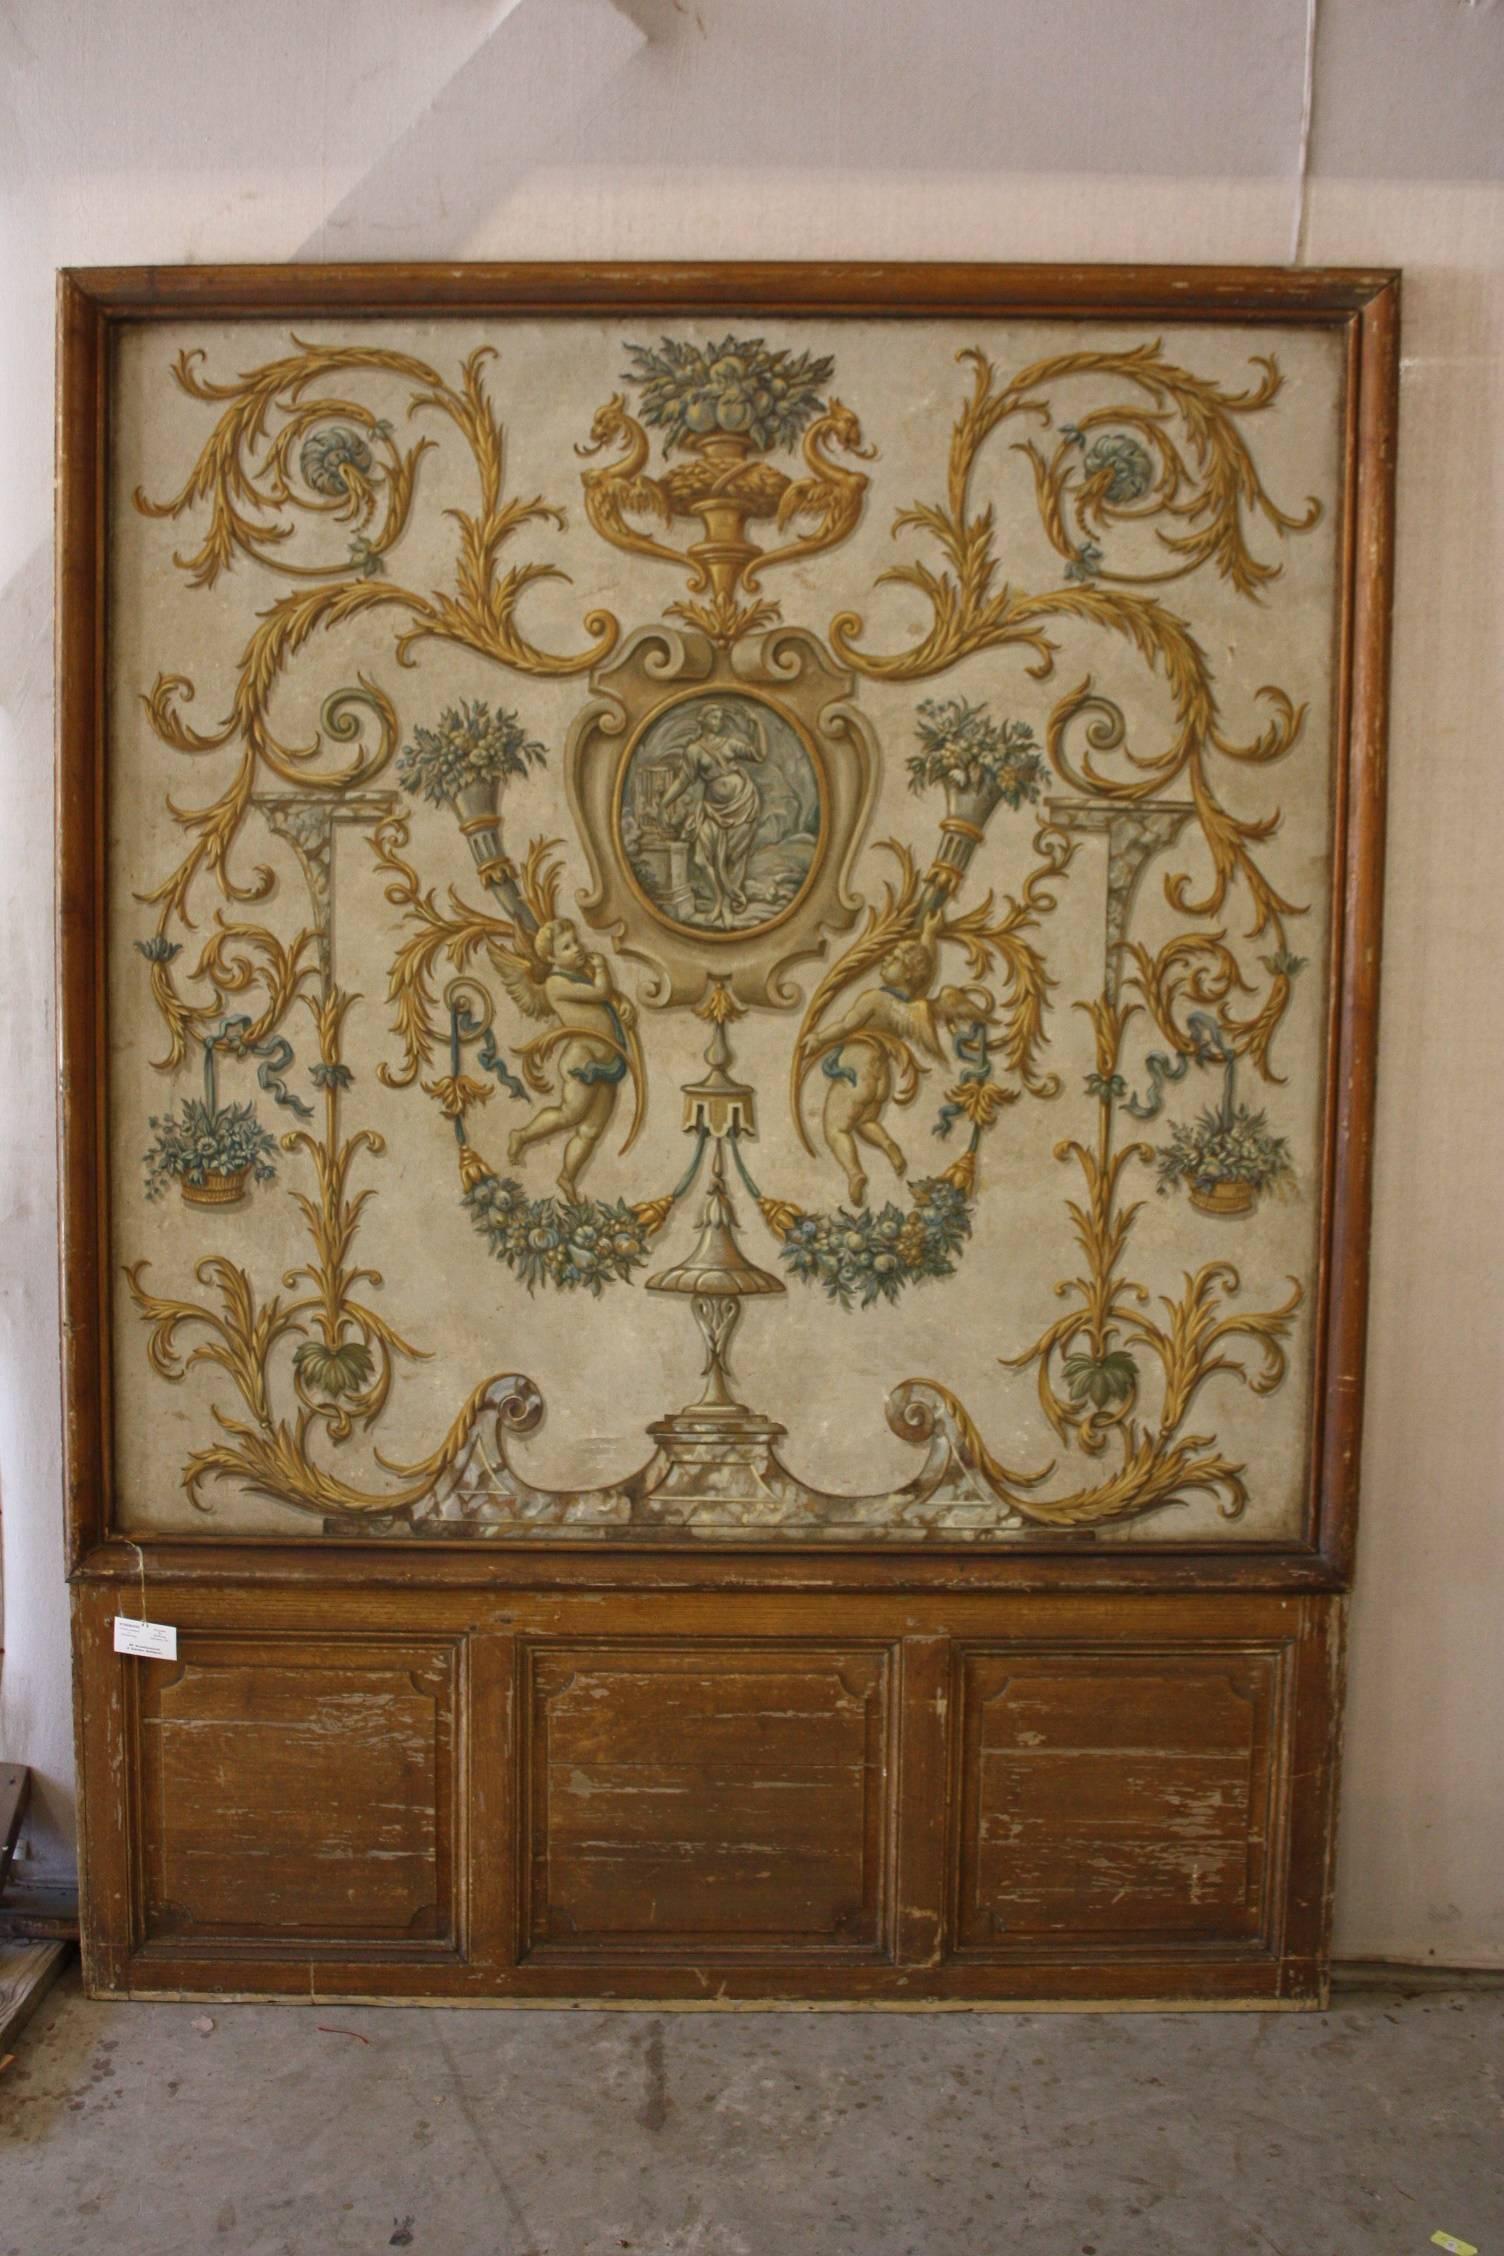 Two framed 18th century French painted panels. The canvases are stretched on paneling and are in very good condition considering their age. Would make excellent headboards.
  
***Only 1 left.  